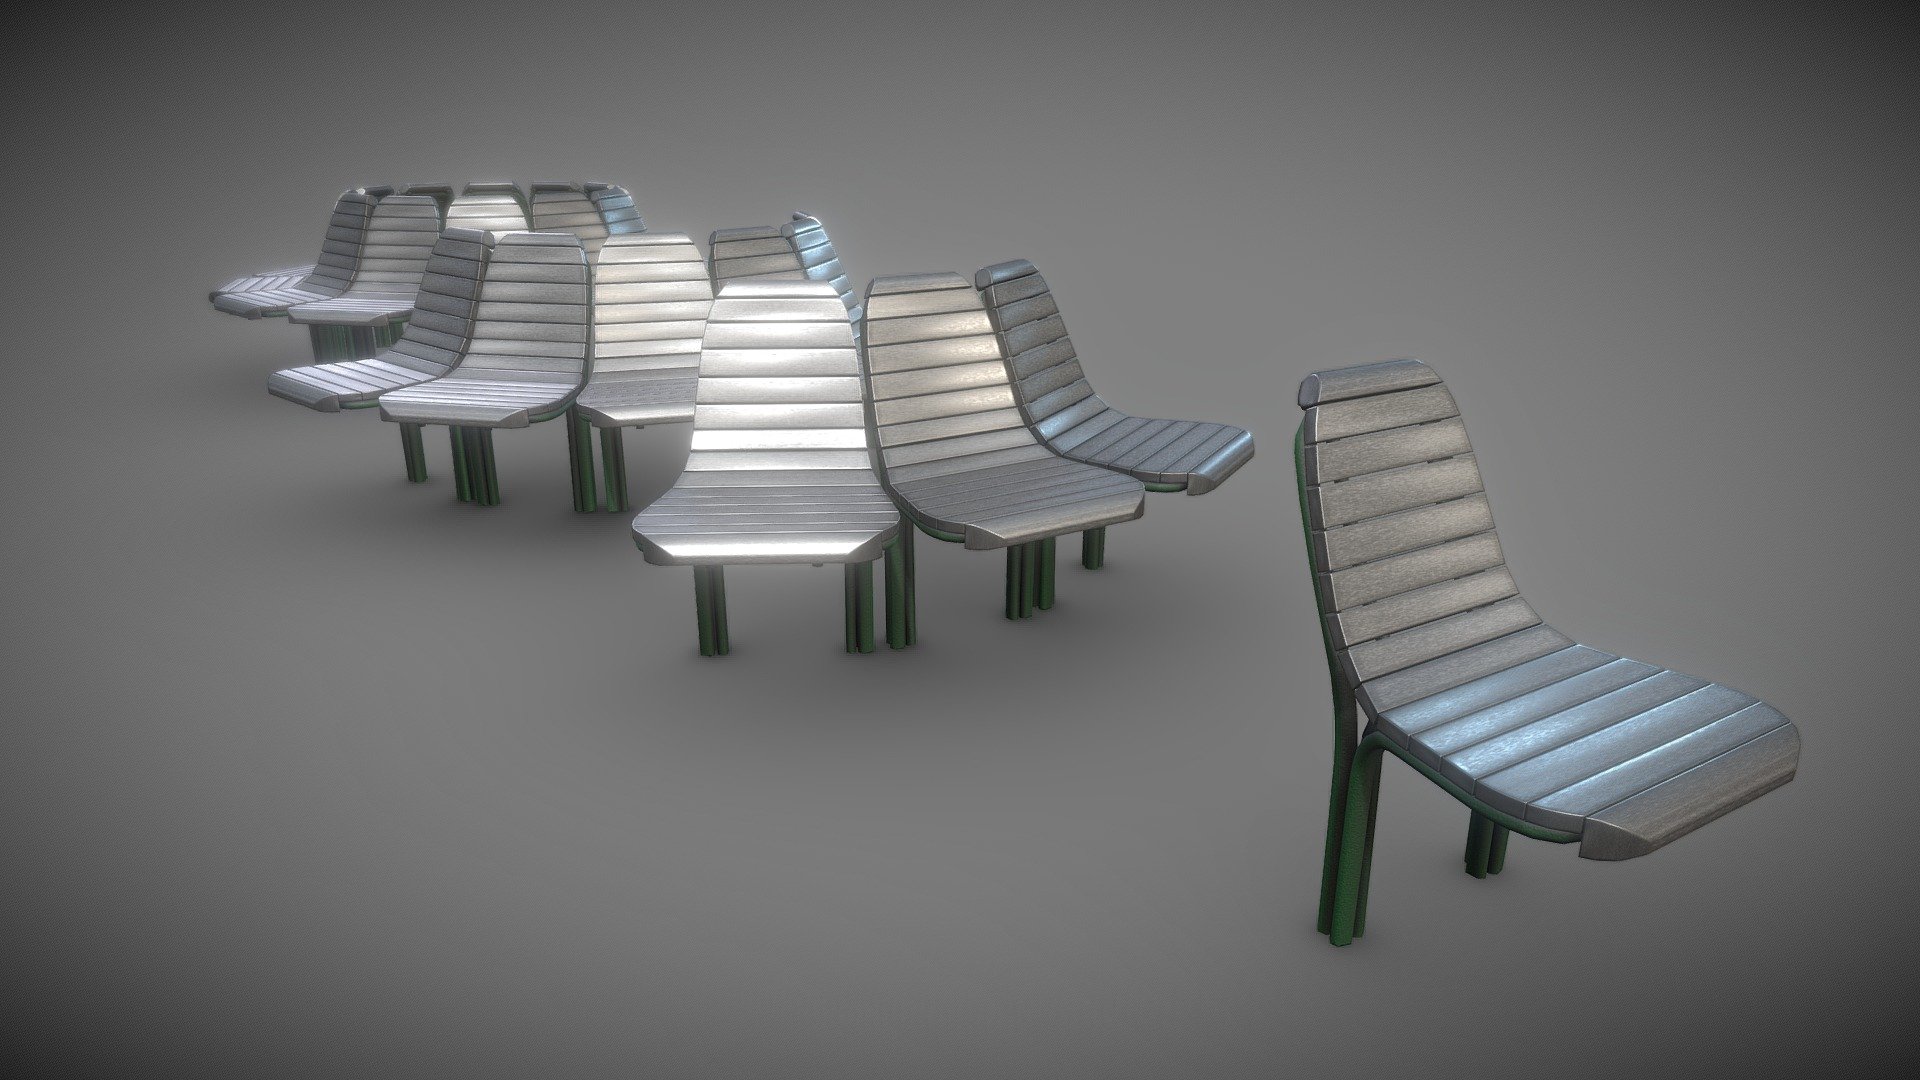 Round bench aluminum version 1.
Bench [7] 4 parts


Round Bench [7] 4 parts Basic Version
Round Bench [7] 4 parts Wood Metal Version 1 


PBR texture maps: 


4096 x 4096  


Modeled and textured by 3DHaupt in Blender-2.82 - Round Bench [7] 4 parts Aluminum Version 1 - Buy Royalty Free 3D model by VIS-All-3D (@VIS-All) 3d model